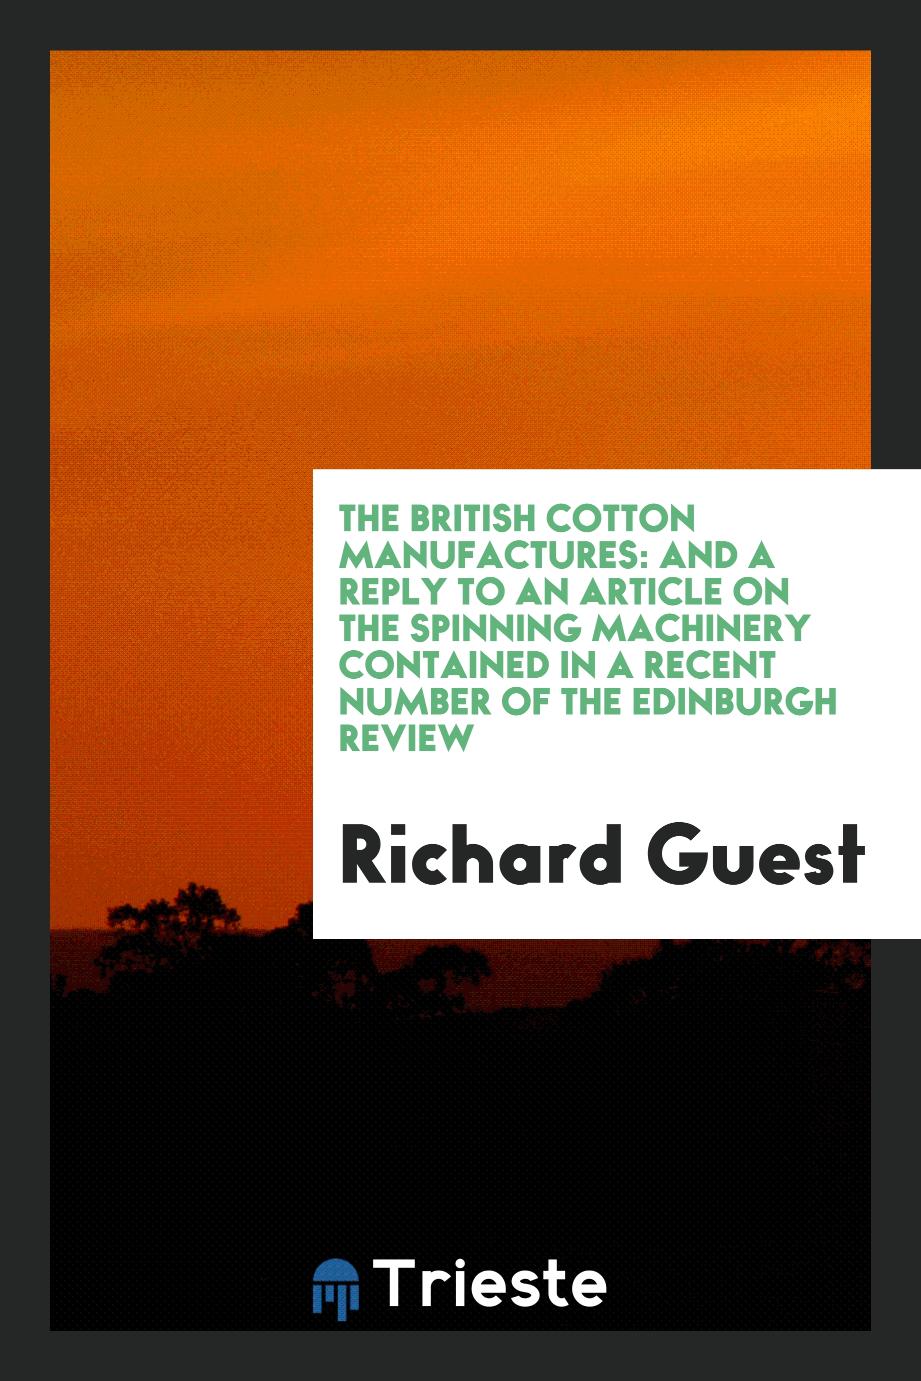 The British Cotton Manufactures: And a Reply to an Article on the Spinning Machinery Contained in a Recent Number of the Edinburgh Review